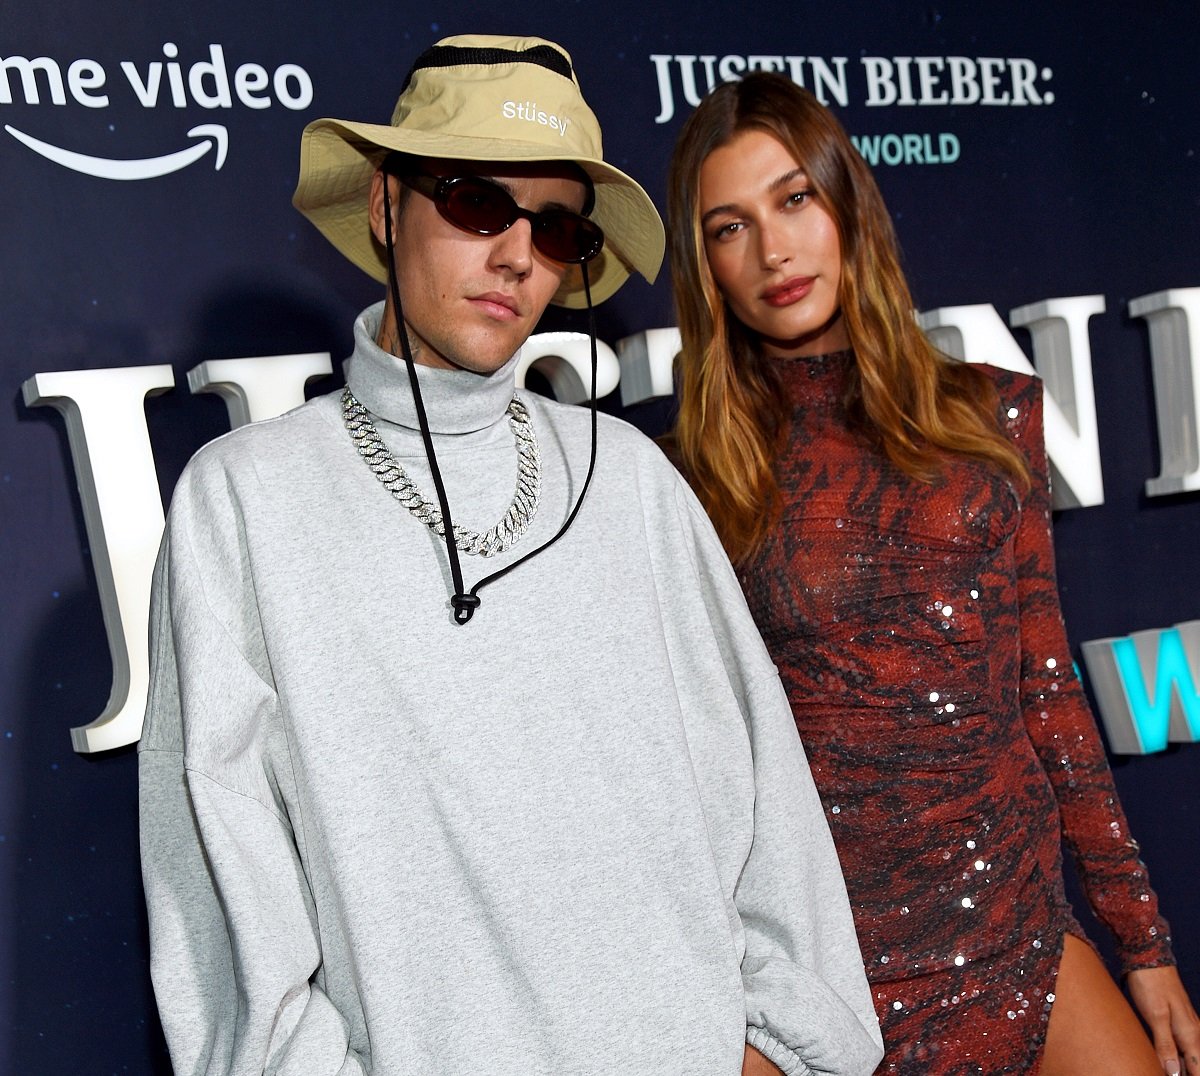 Justin Bieber and Hailey Bieber pose for a photo on the carpet at the Justin Bieber Our World event